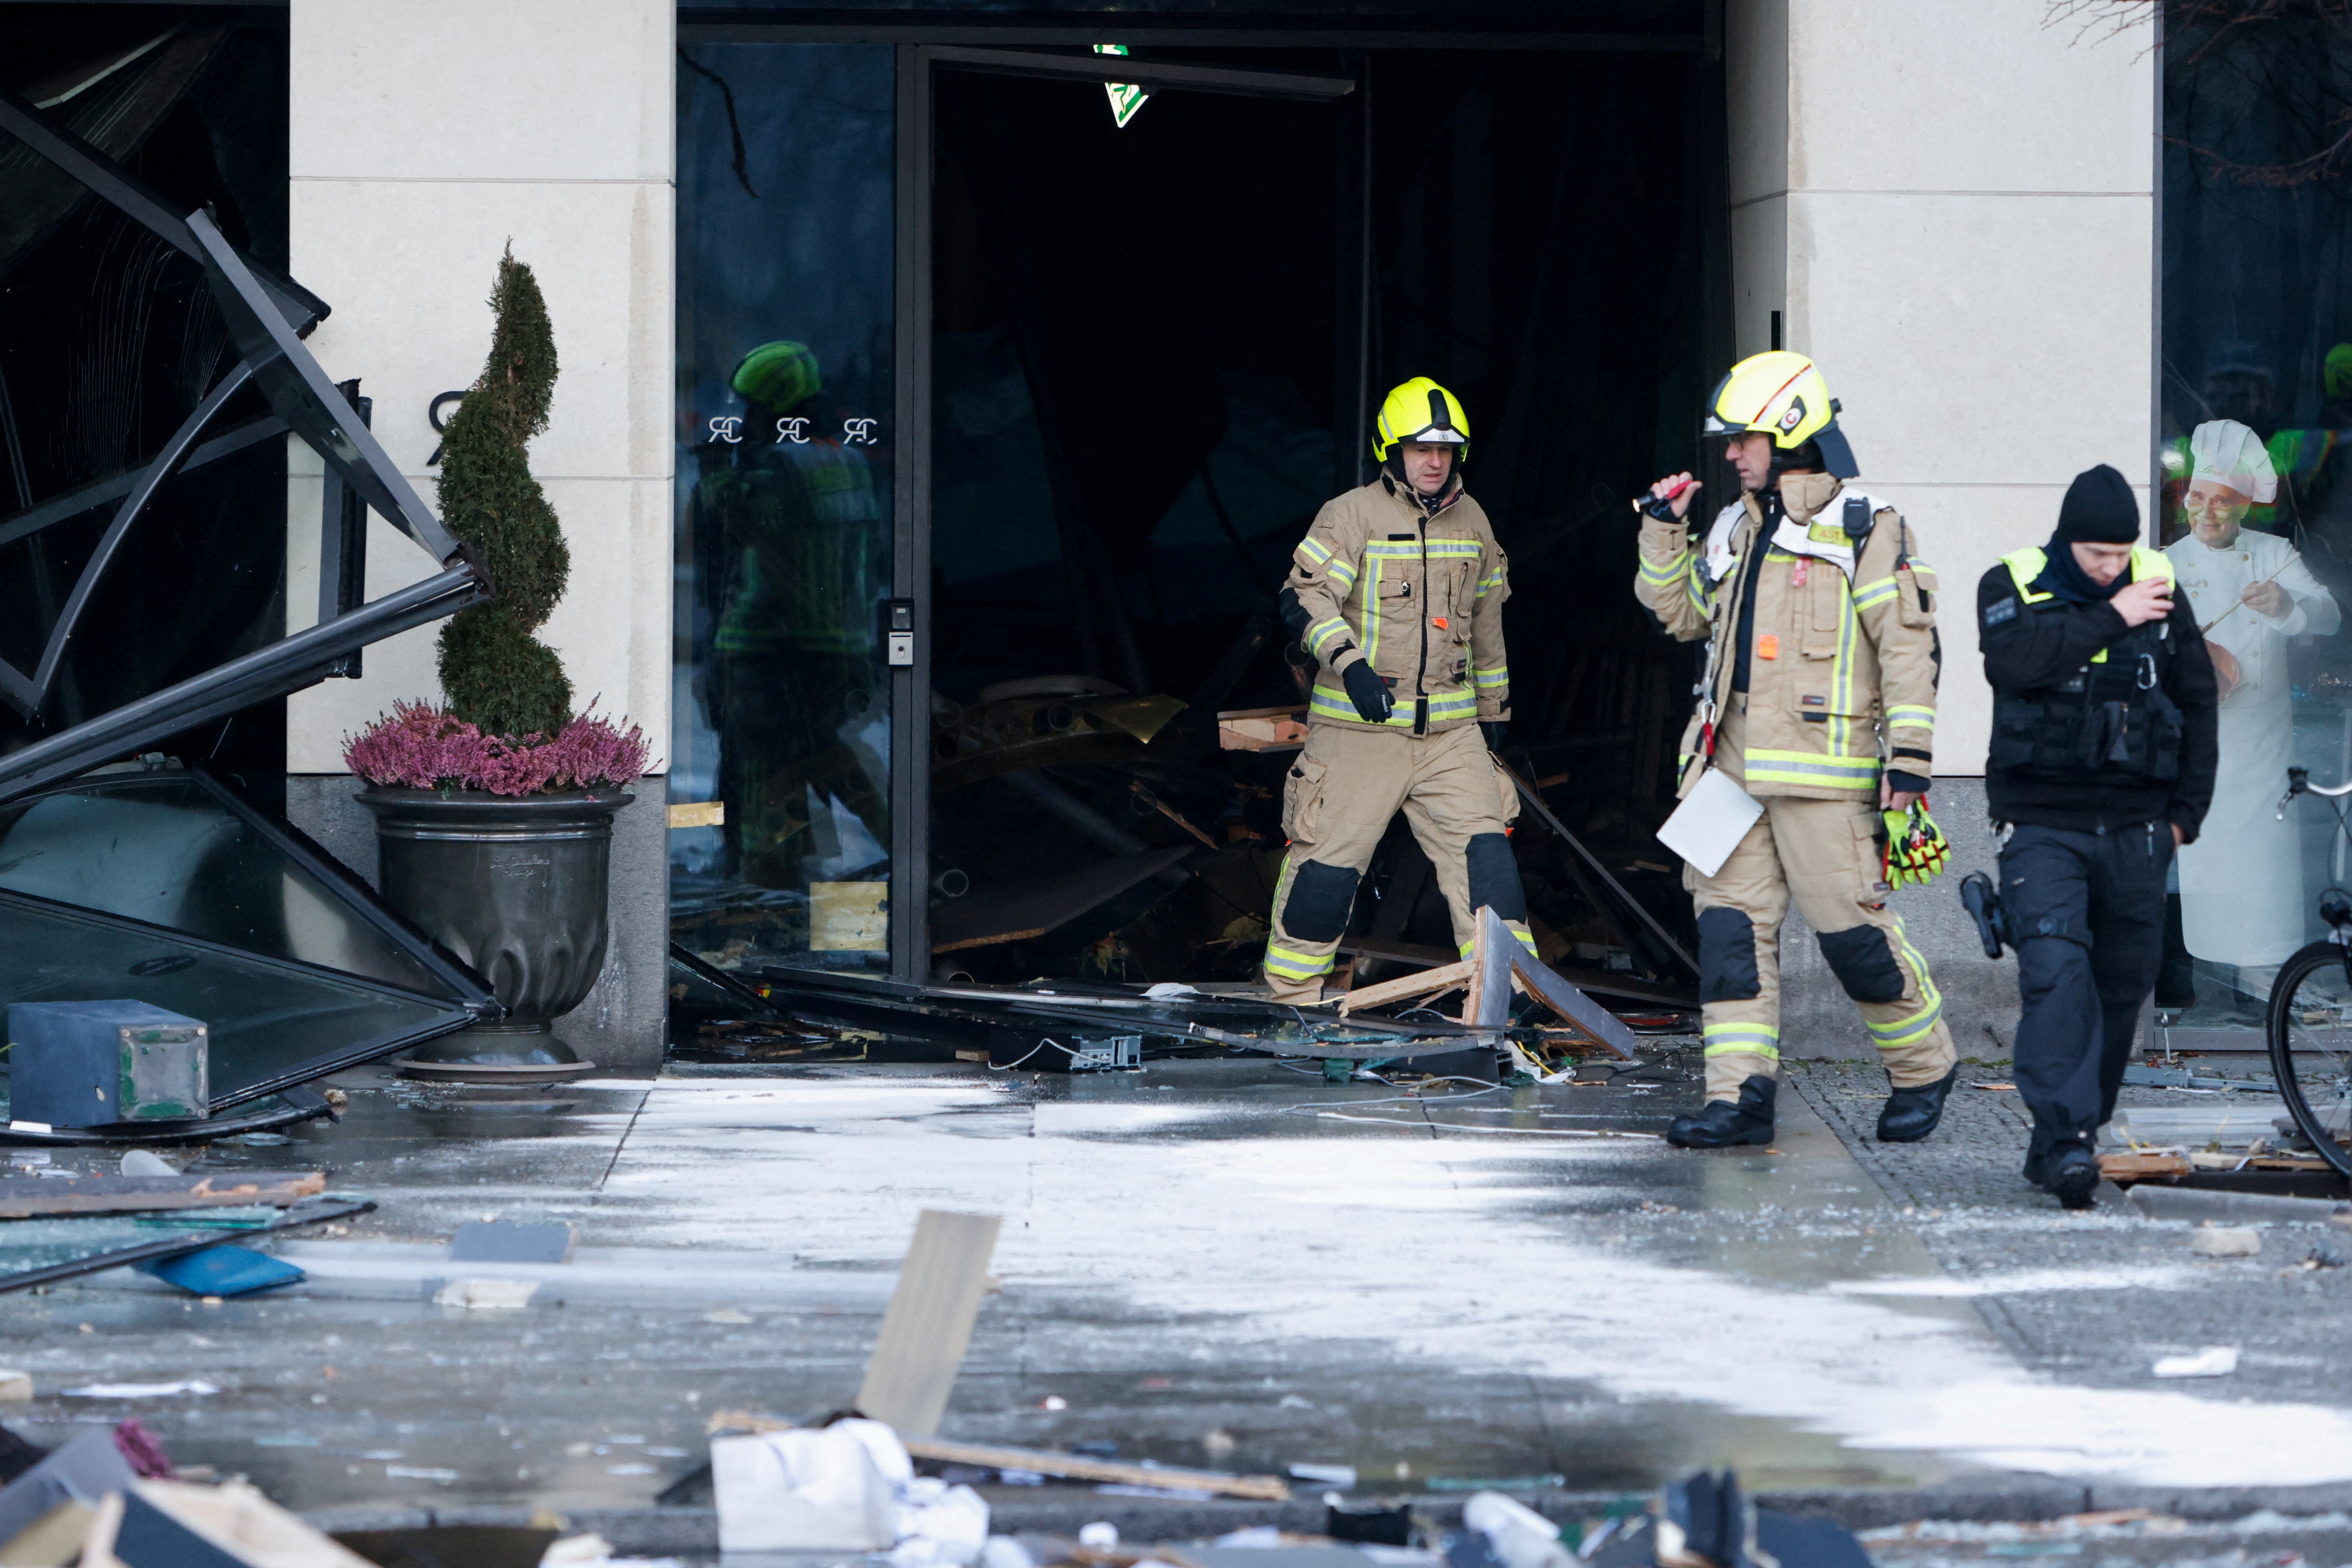 Emergency workers outside of a building, with a lot of broken glass and debris around them.